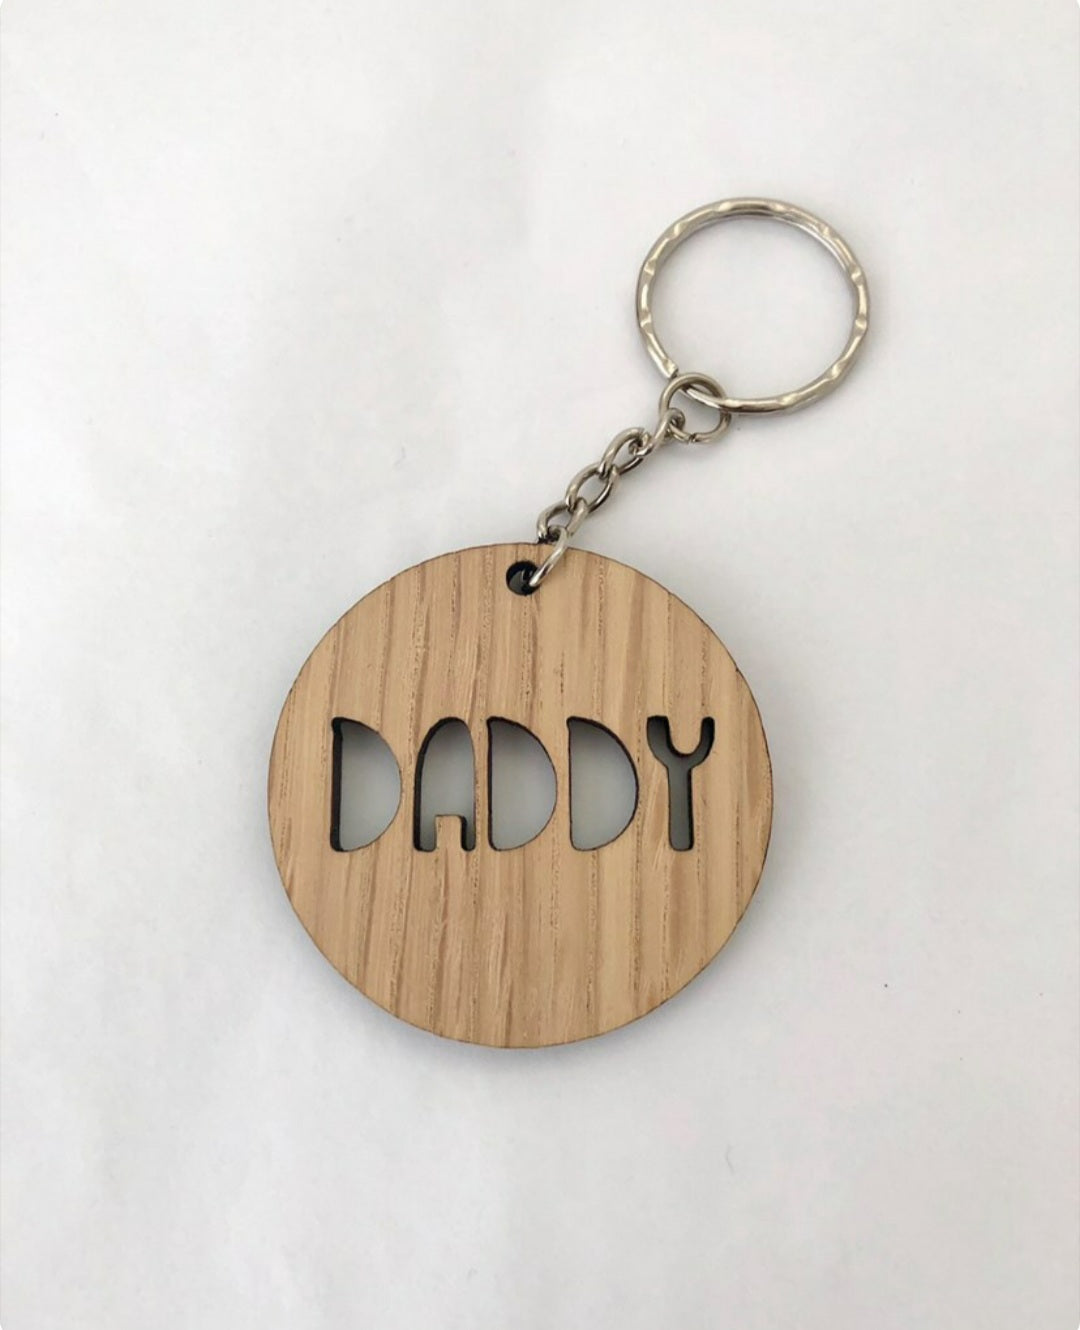 The Wooden Family Key Ring Keepsake makes a lovely gift for any Mummy, Daddy or Grandparent.